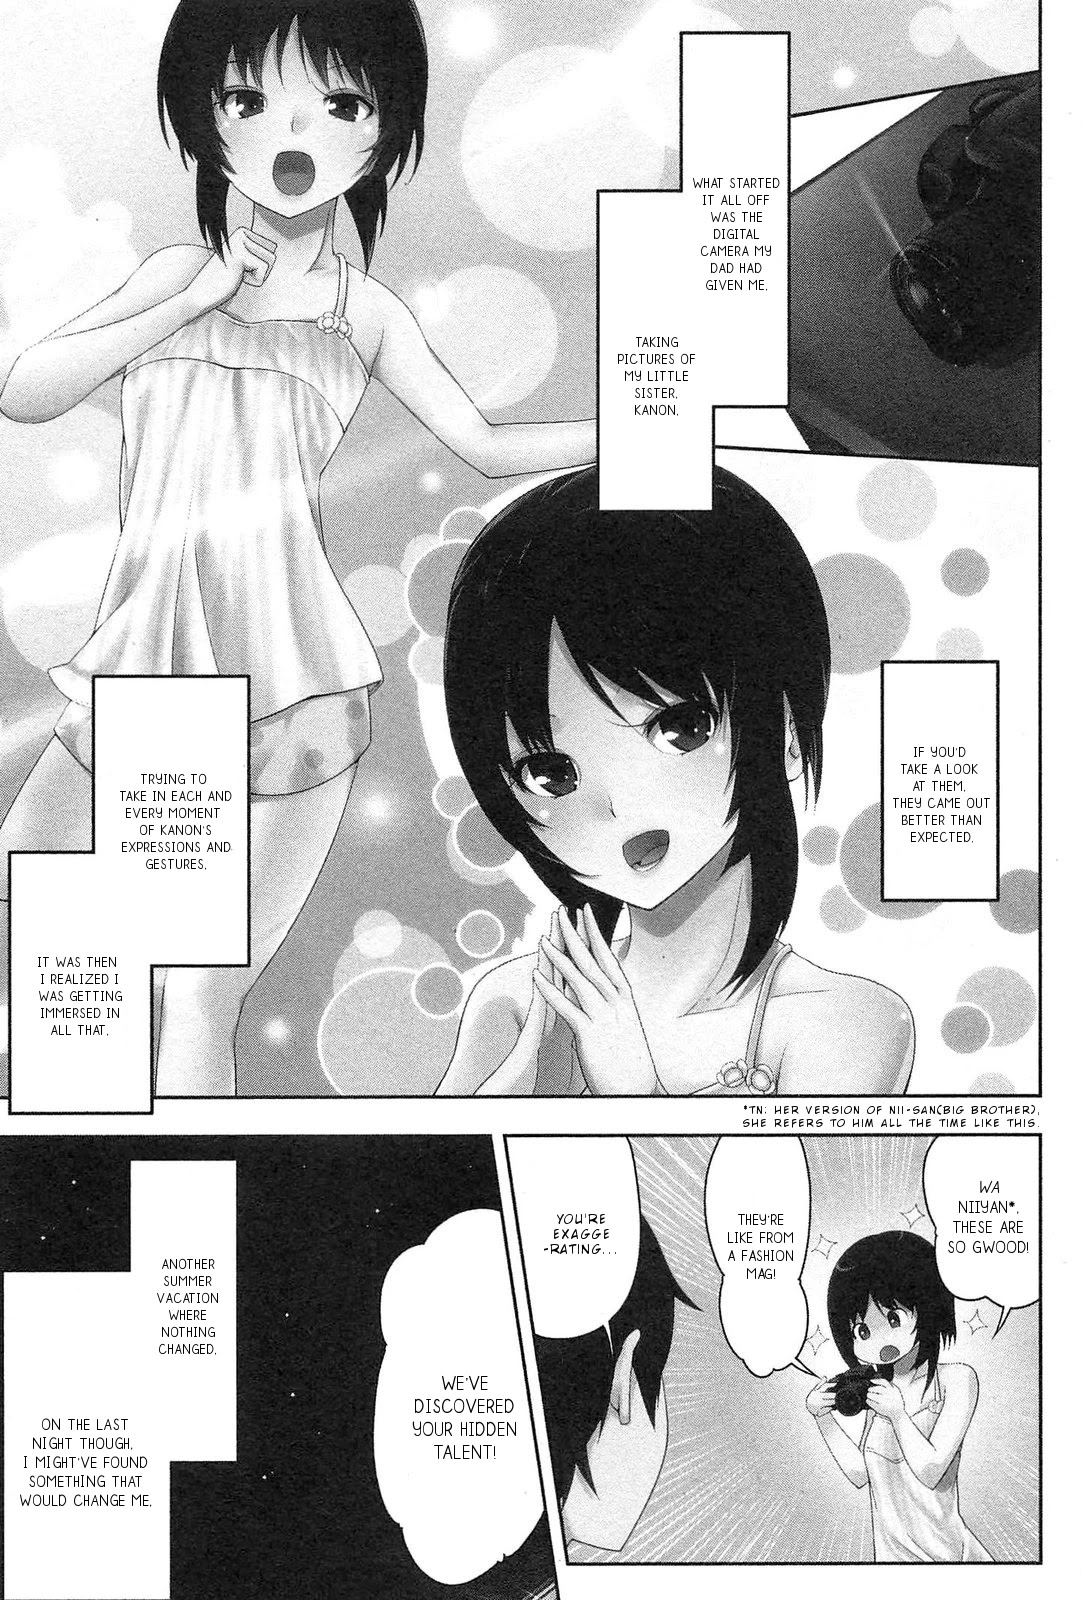 Photo Kano - Memorial Pictures - Page 3